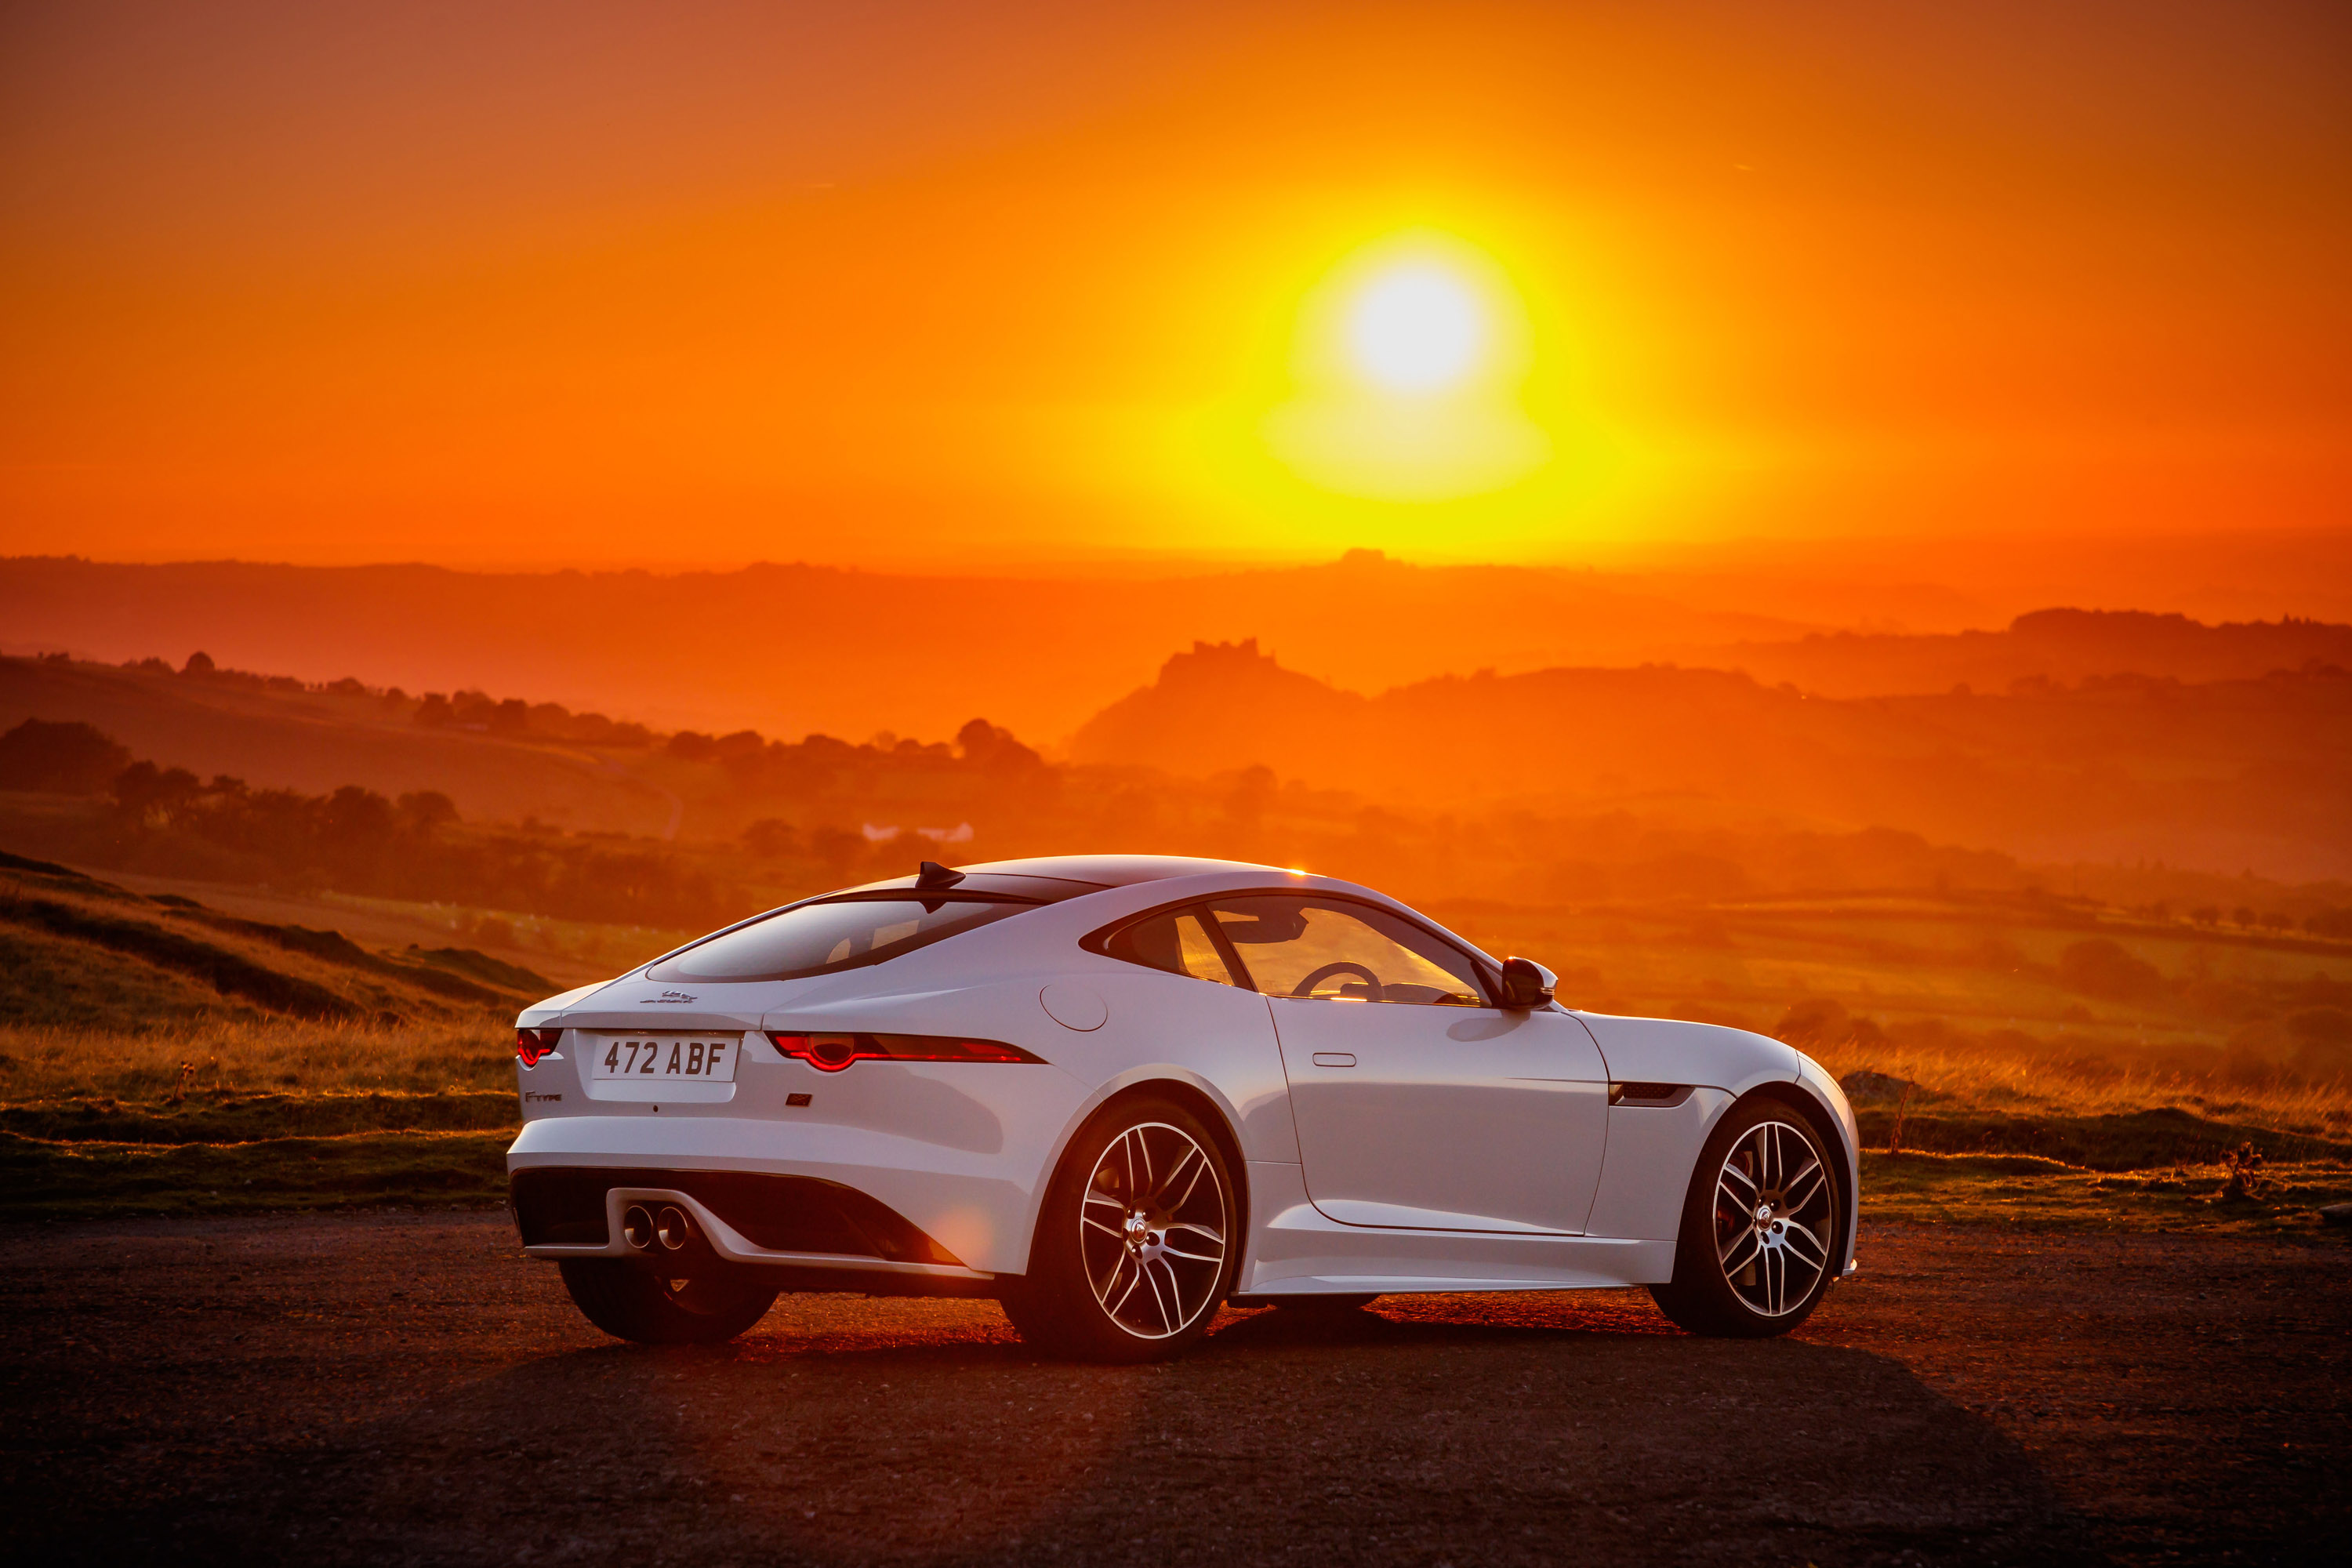 Jaguar F-TYPE Chequered Flag Edition